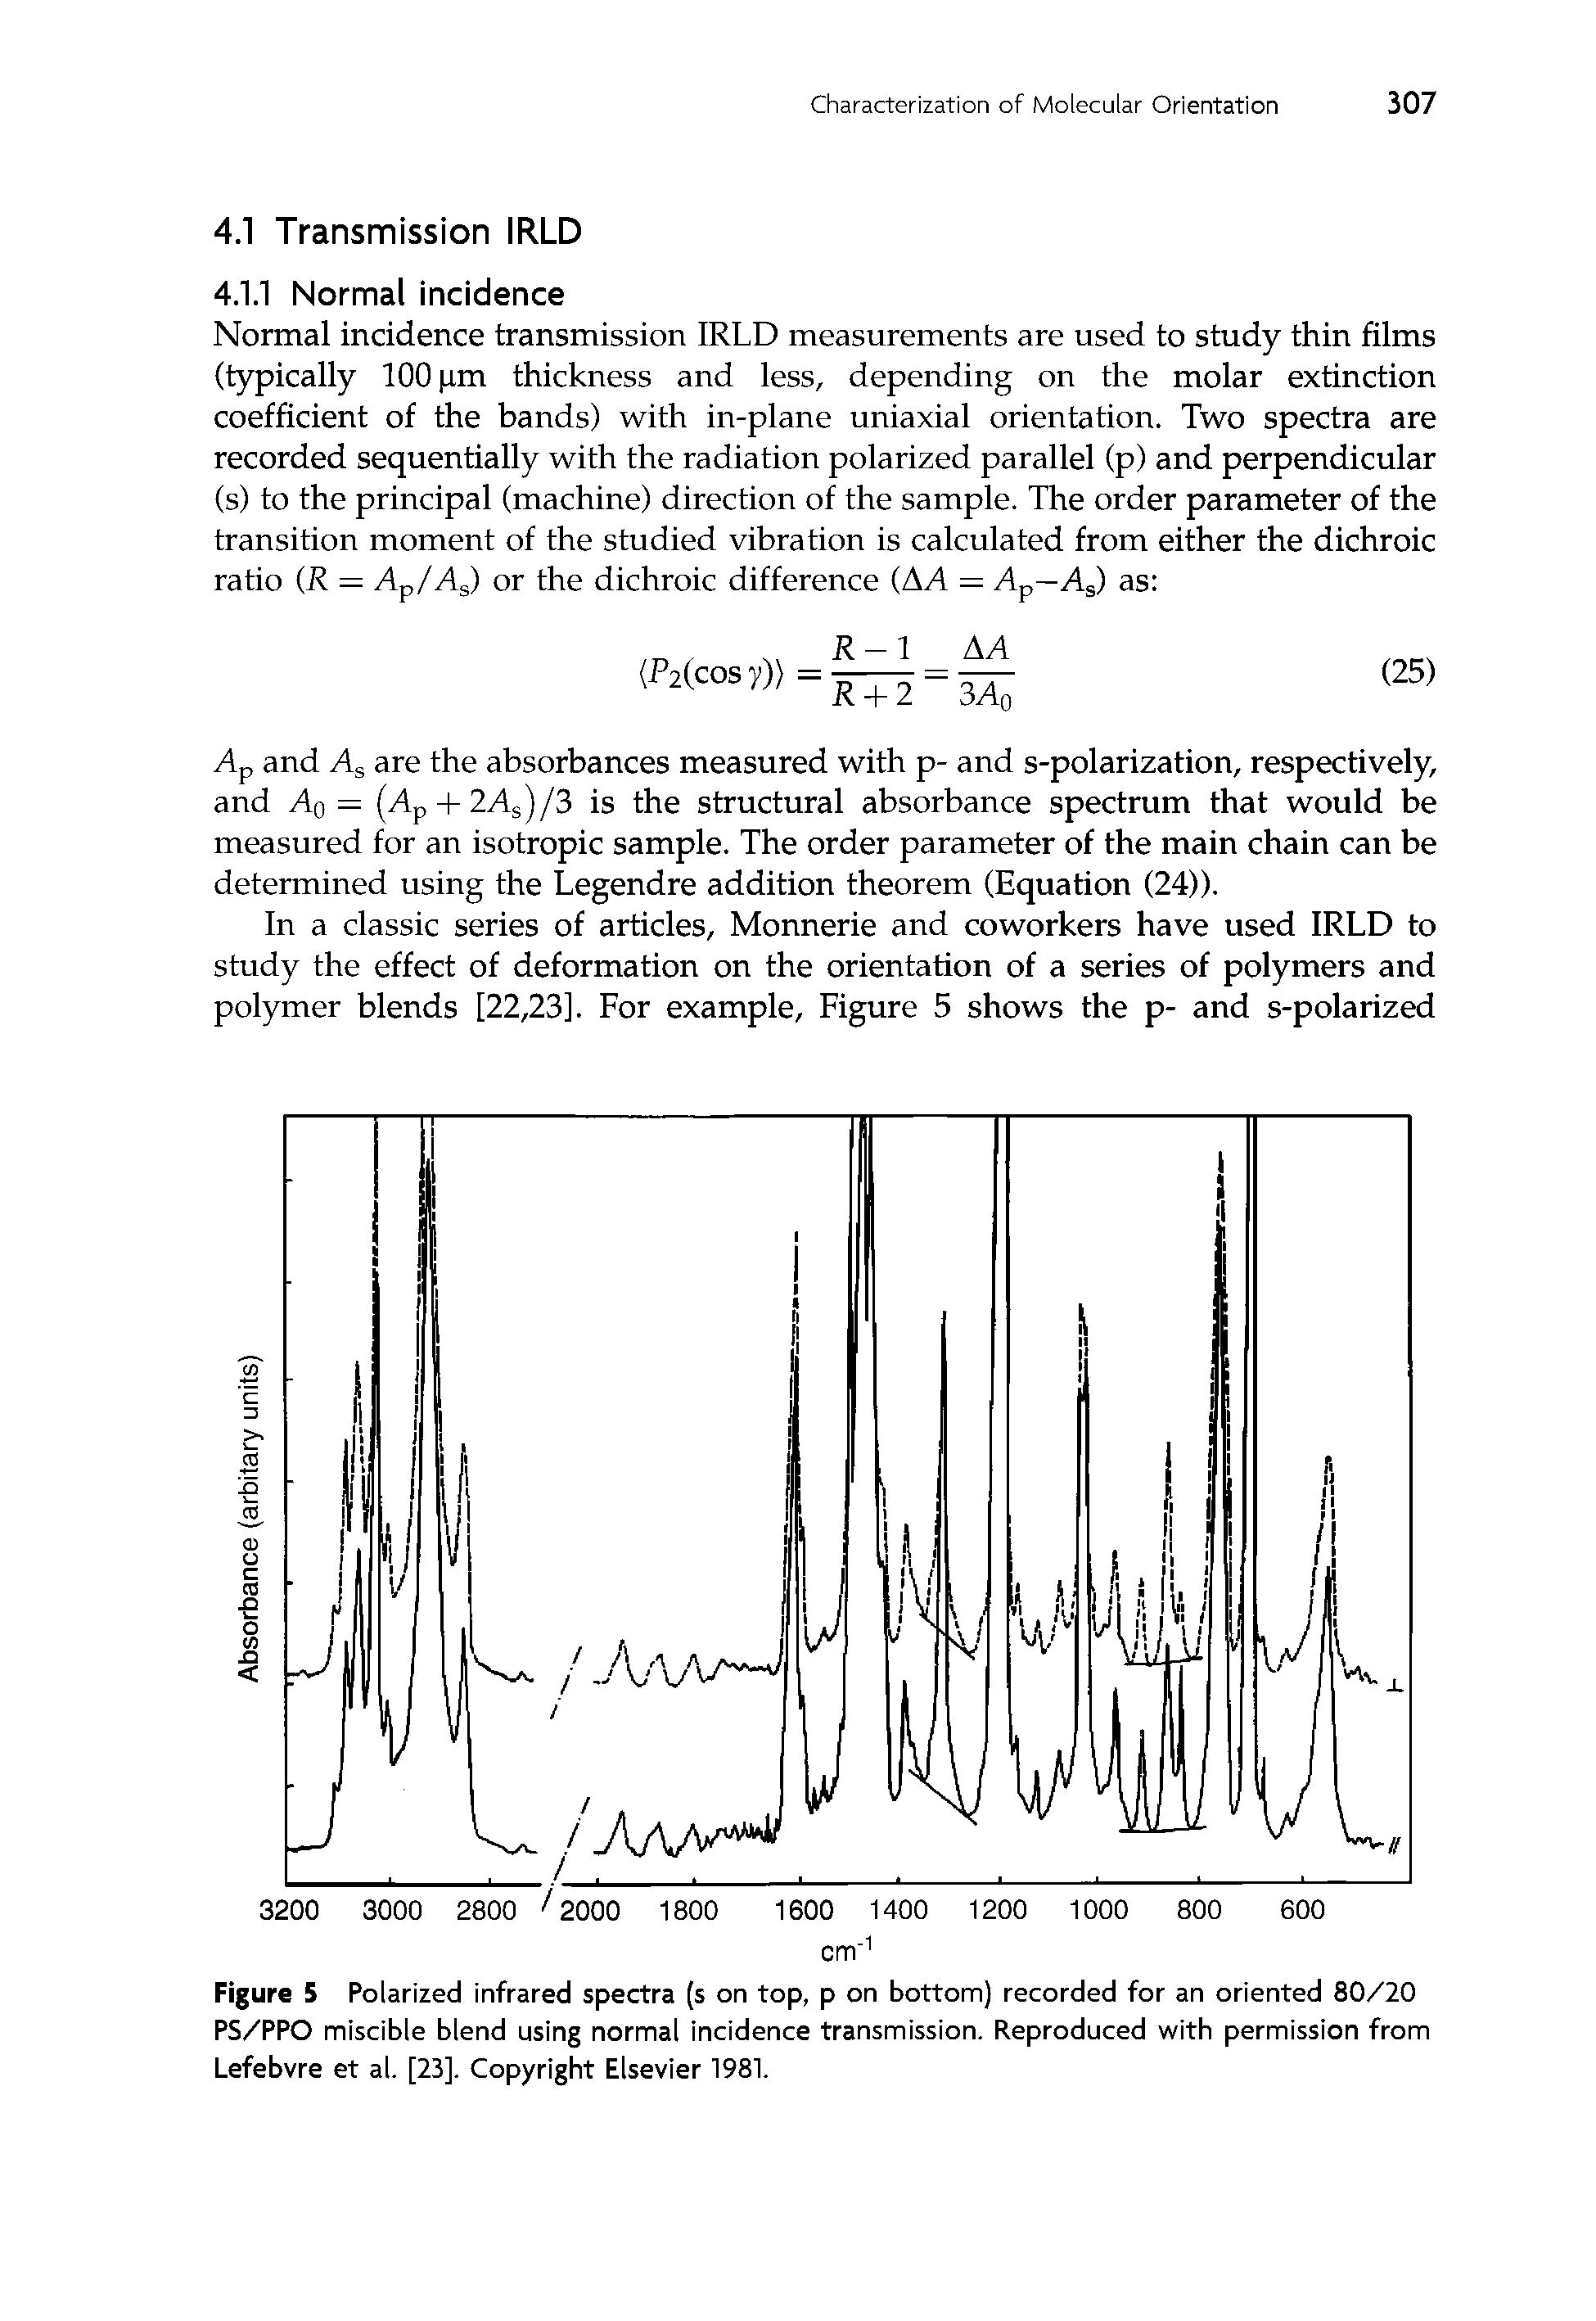 Figure 5 Polarized infrared spectra (s on top, p on bottom) recorded for an oriented 80/20 PS/PPO miscible blend using normal incidence transmission. Reproduced with permission from Lefebvre et al. [23]. Copyright Elsevier 1981.